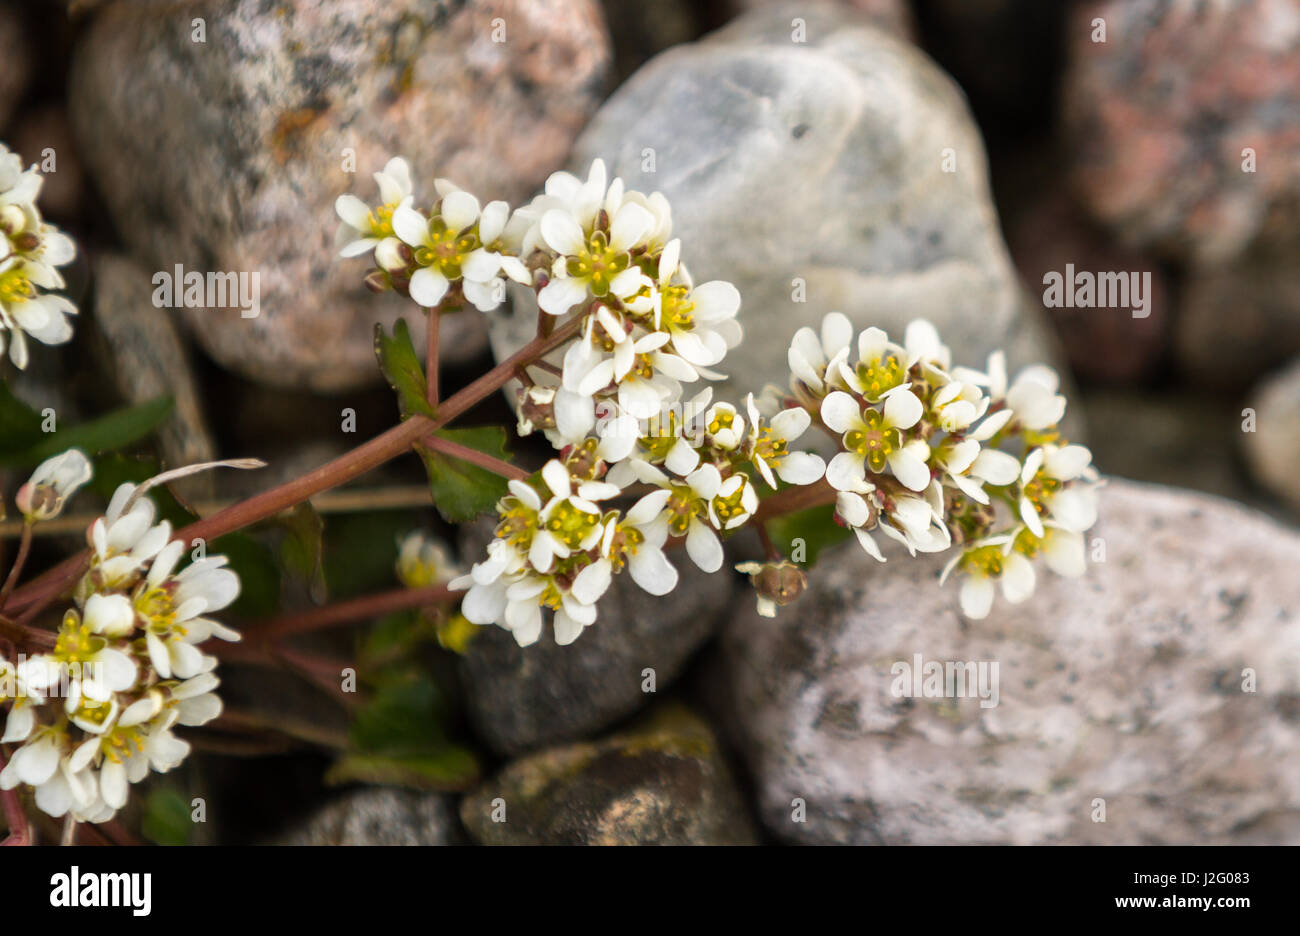 Common Scurvygrass, Cochlearia officinalis, with white flowers, growing on the pebble shore. The scurvy grass is rich in vitamin C, and were used by s Stock Photo